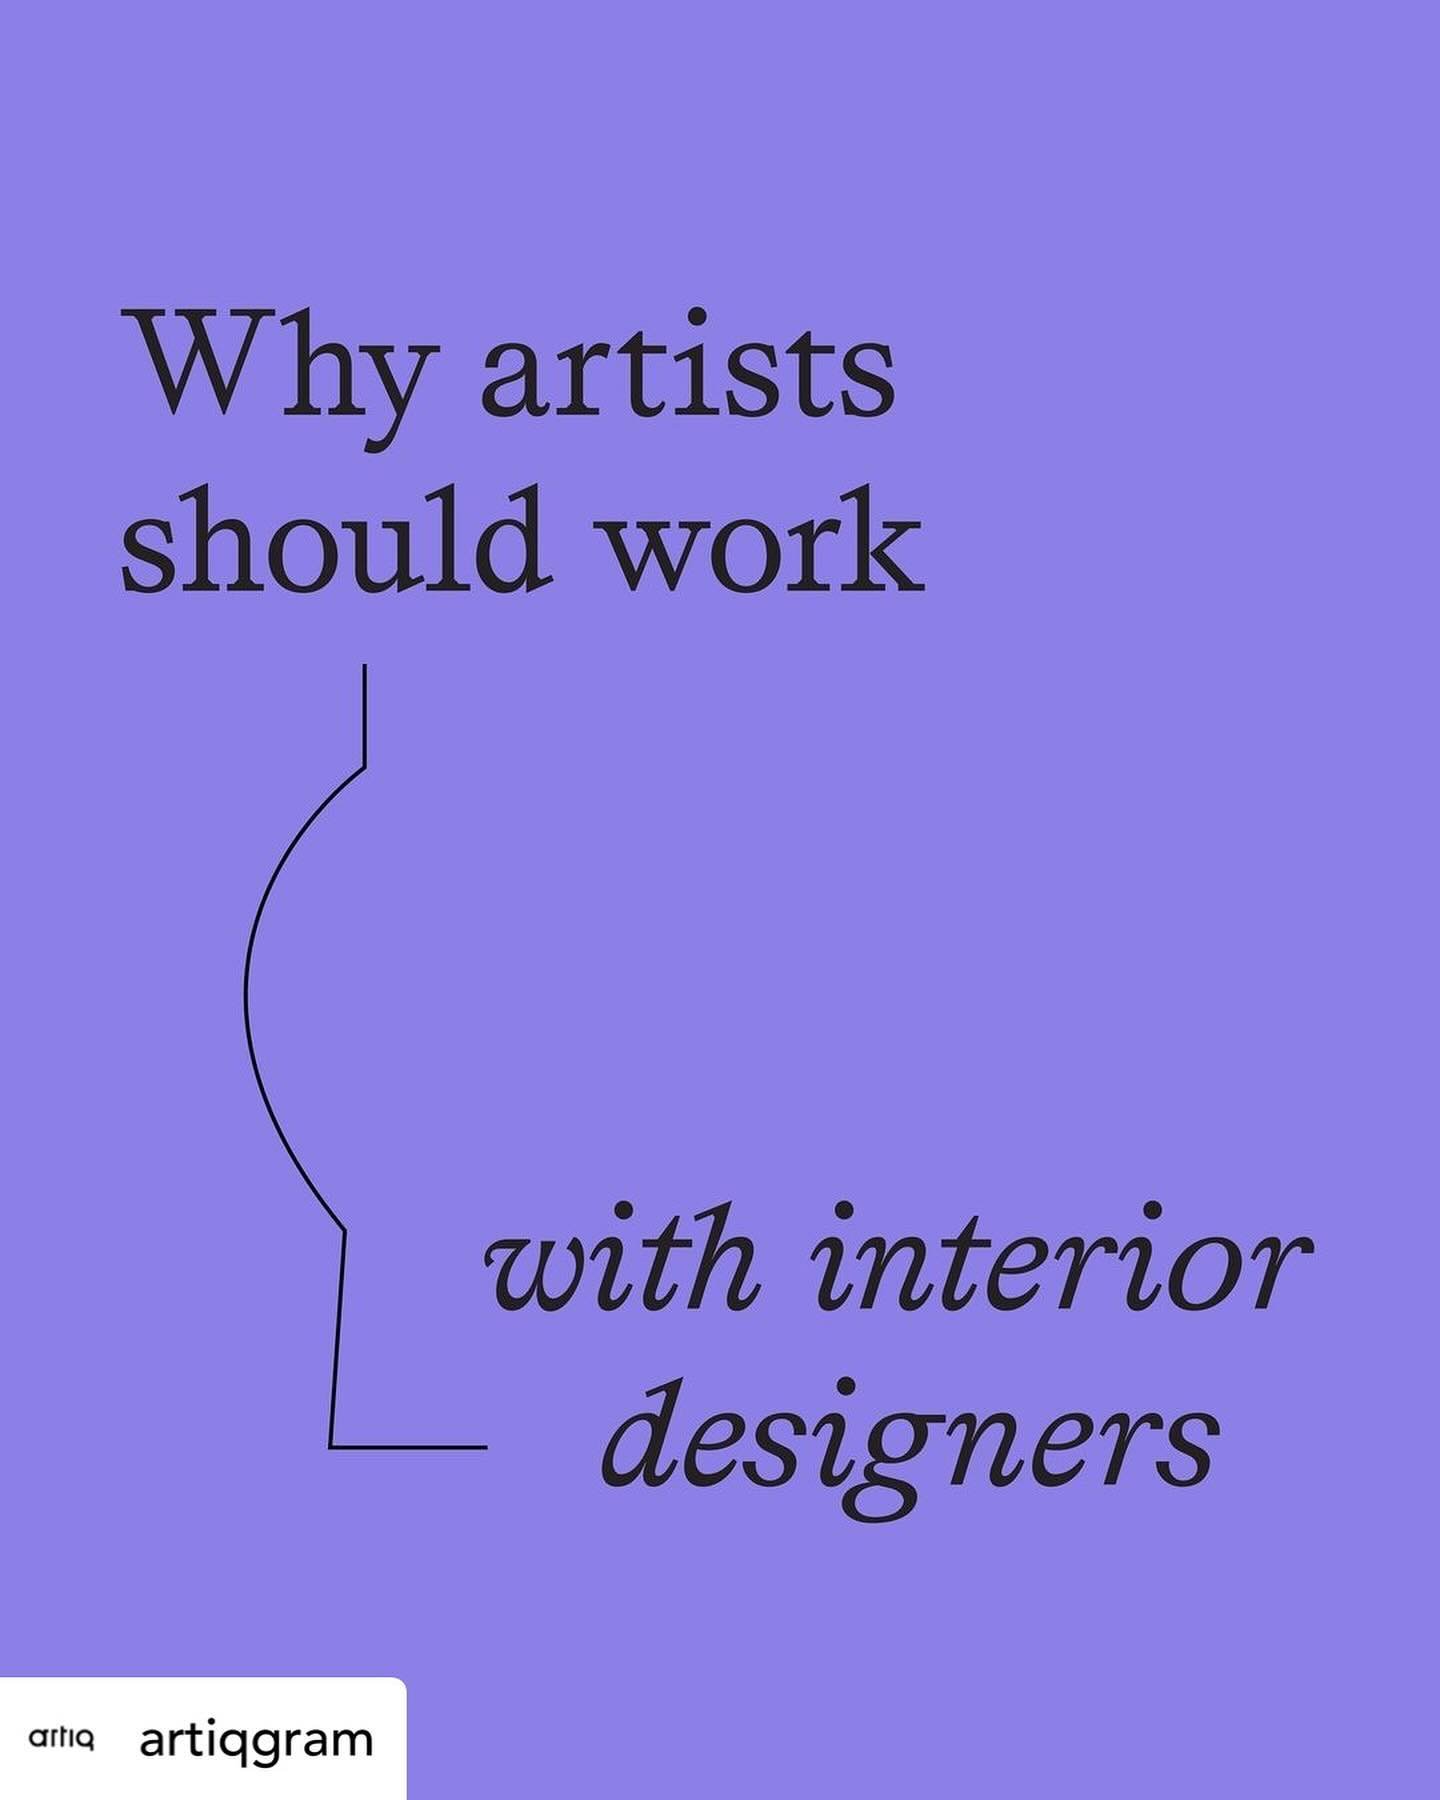 I couldn&rsquo;t agree more! Interior designers are among my best clients 🥰

Posted @withregram &bull; @artiqgram As a business, we exist to prove the viability of creative work. We want all artists to see just how far their creativity can take them